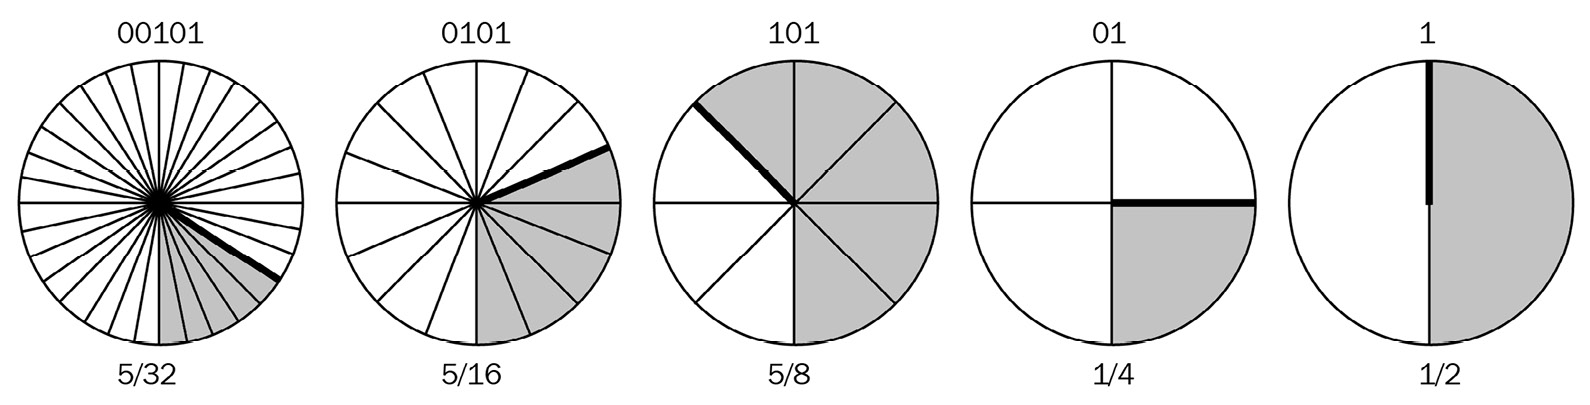 Figure 7.11 – Representation of 5 on incrementally smaller bit circles, starting with 5 bits
